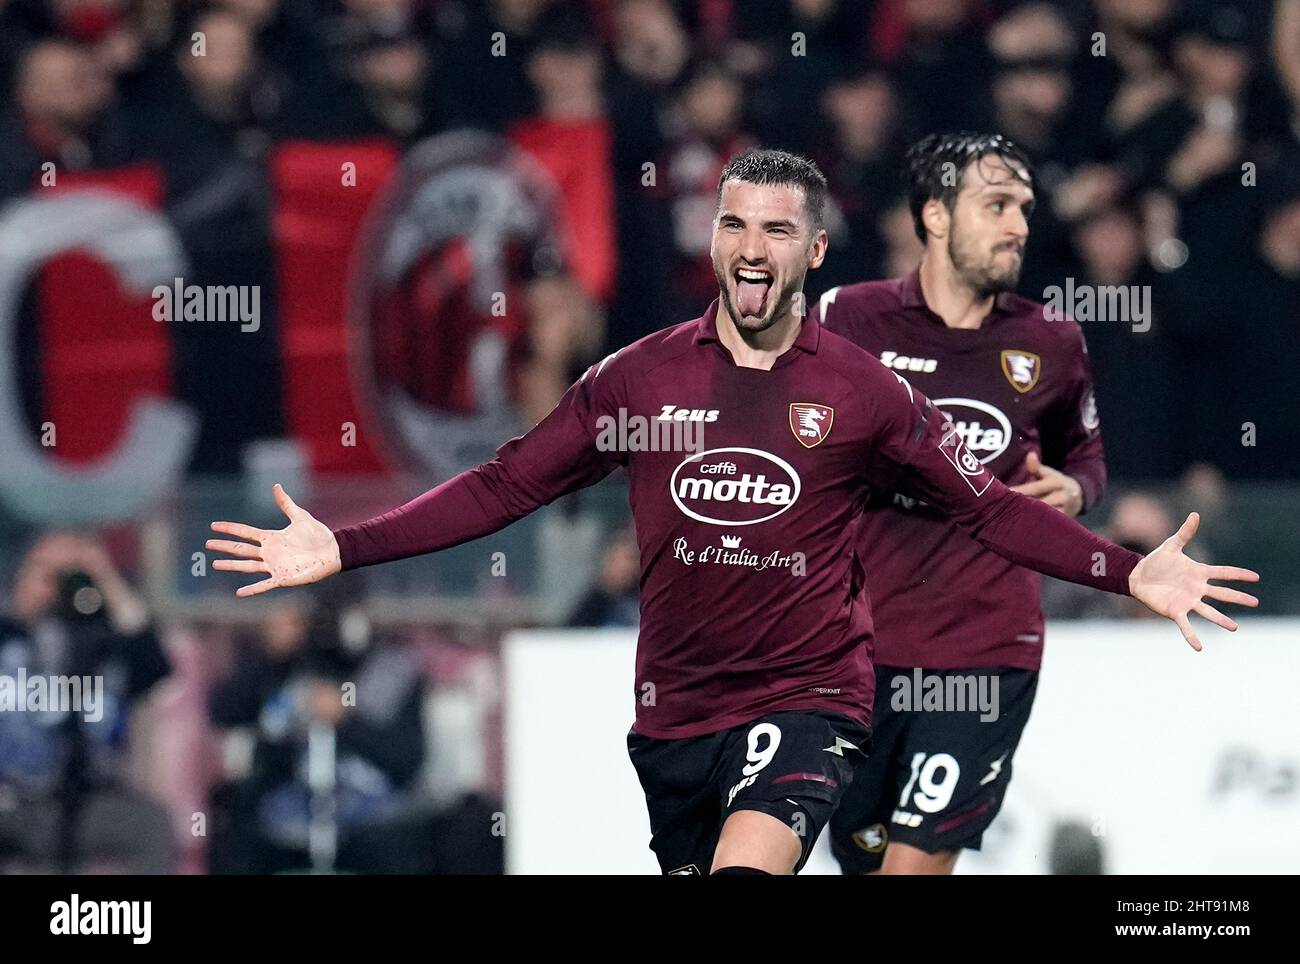 SALERNO, ITALY - FEBRUARY 19: Federico Bonazzoli of US Salernitana celebrates with his team after scores his goal ,during the Serie A match between US Salernitana and AC Milan at Stadio Arechi on February 19, 2022 in Salerno, Italy. (Photo by MB Media) Stock Photo